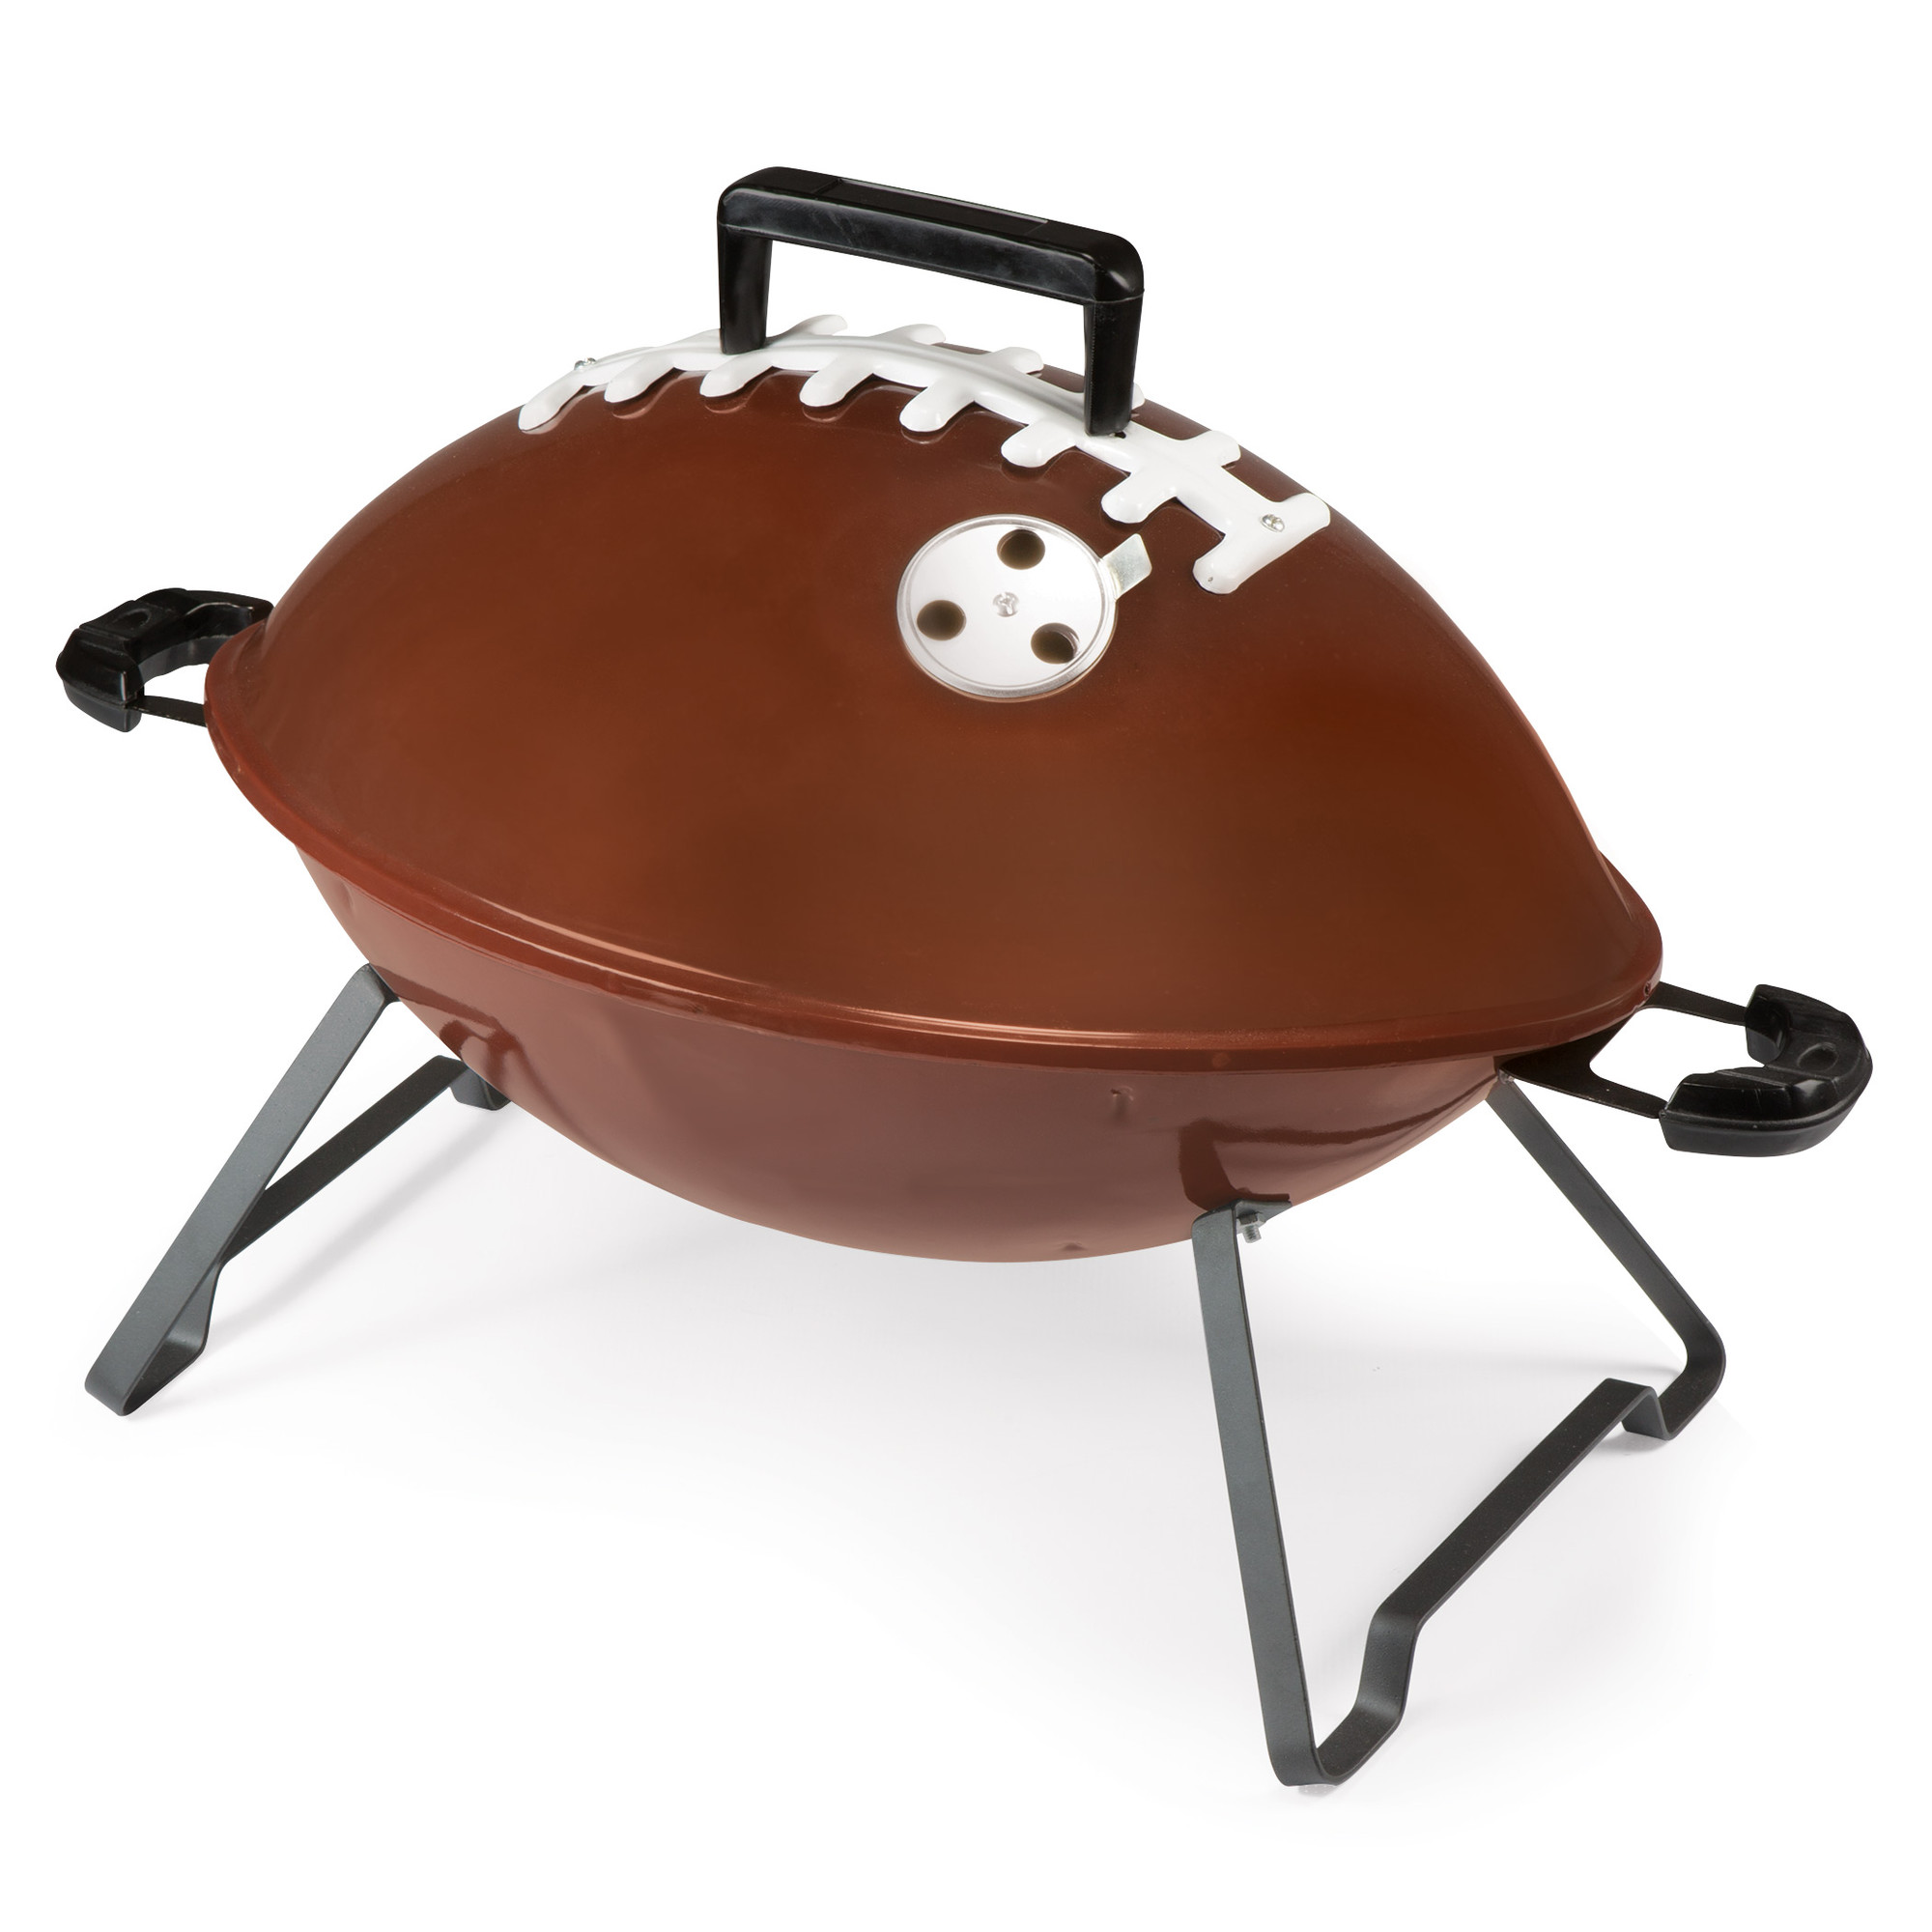 Football Tailgating and Party Picks Sure to Score